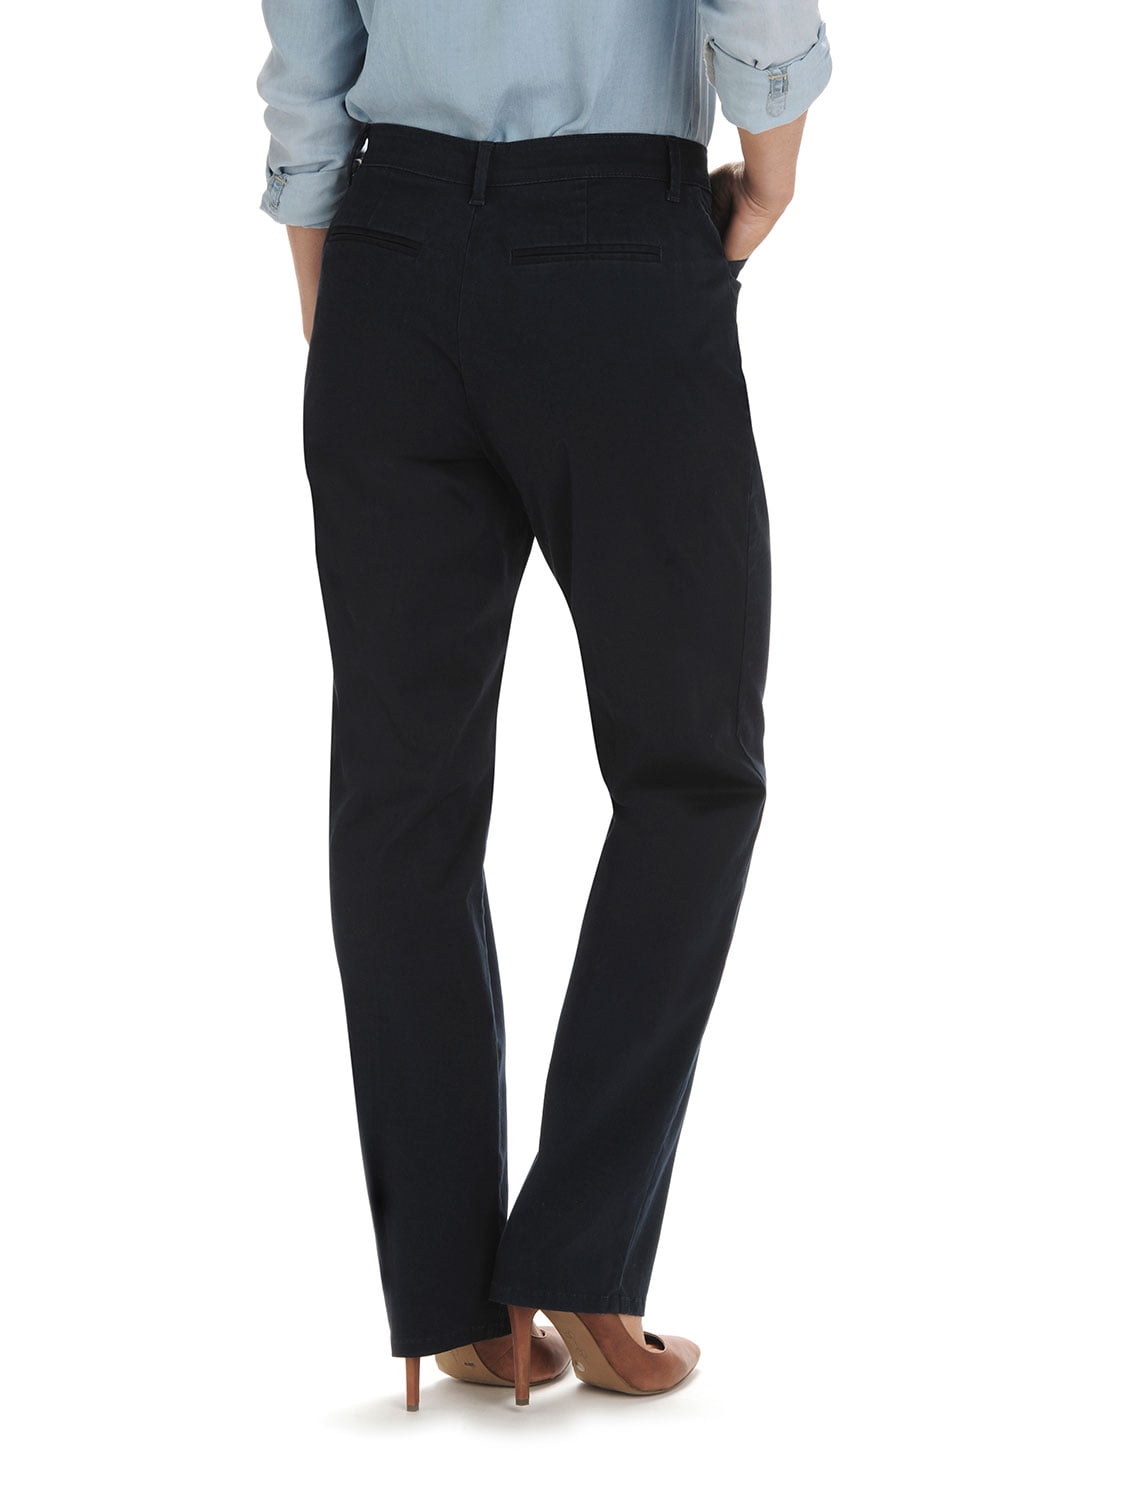 Lee Women's Relaxed Fit All Day Straight Leg Pants - Charcoal, Charcoal  Heather, 16 Short